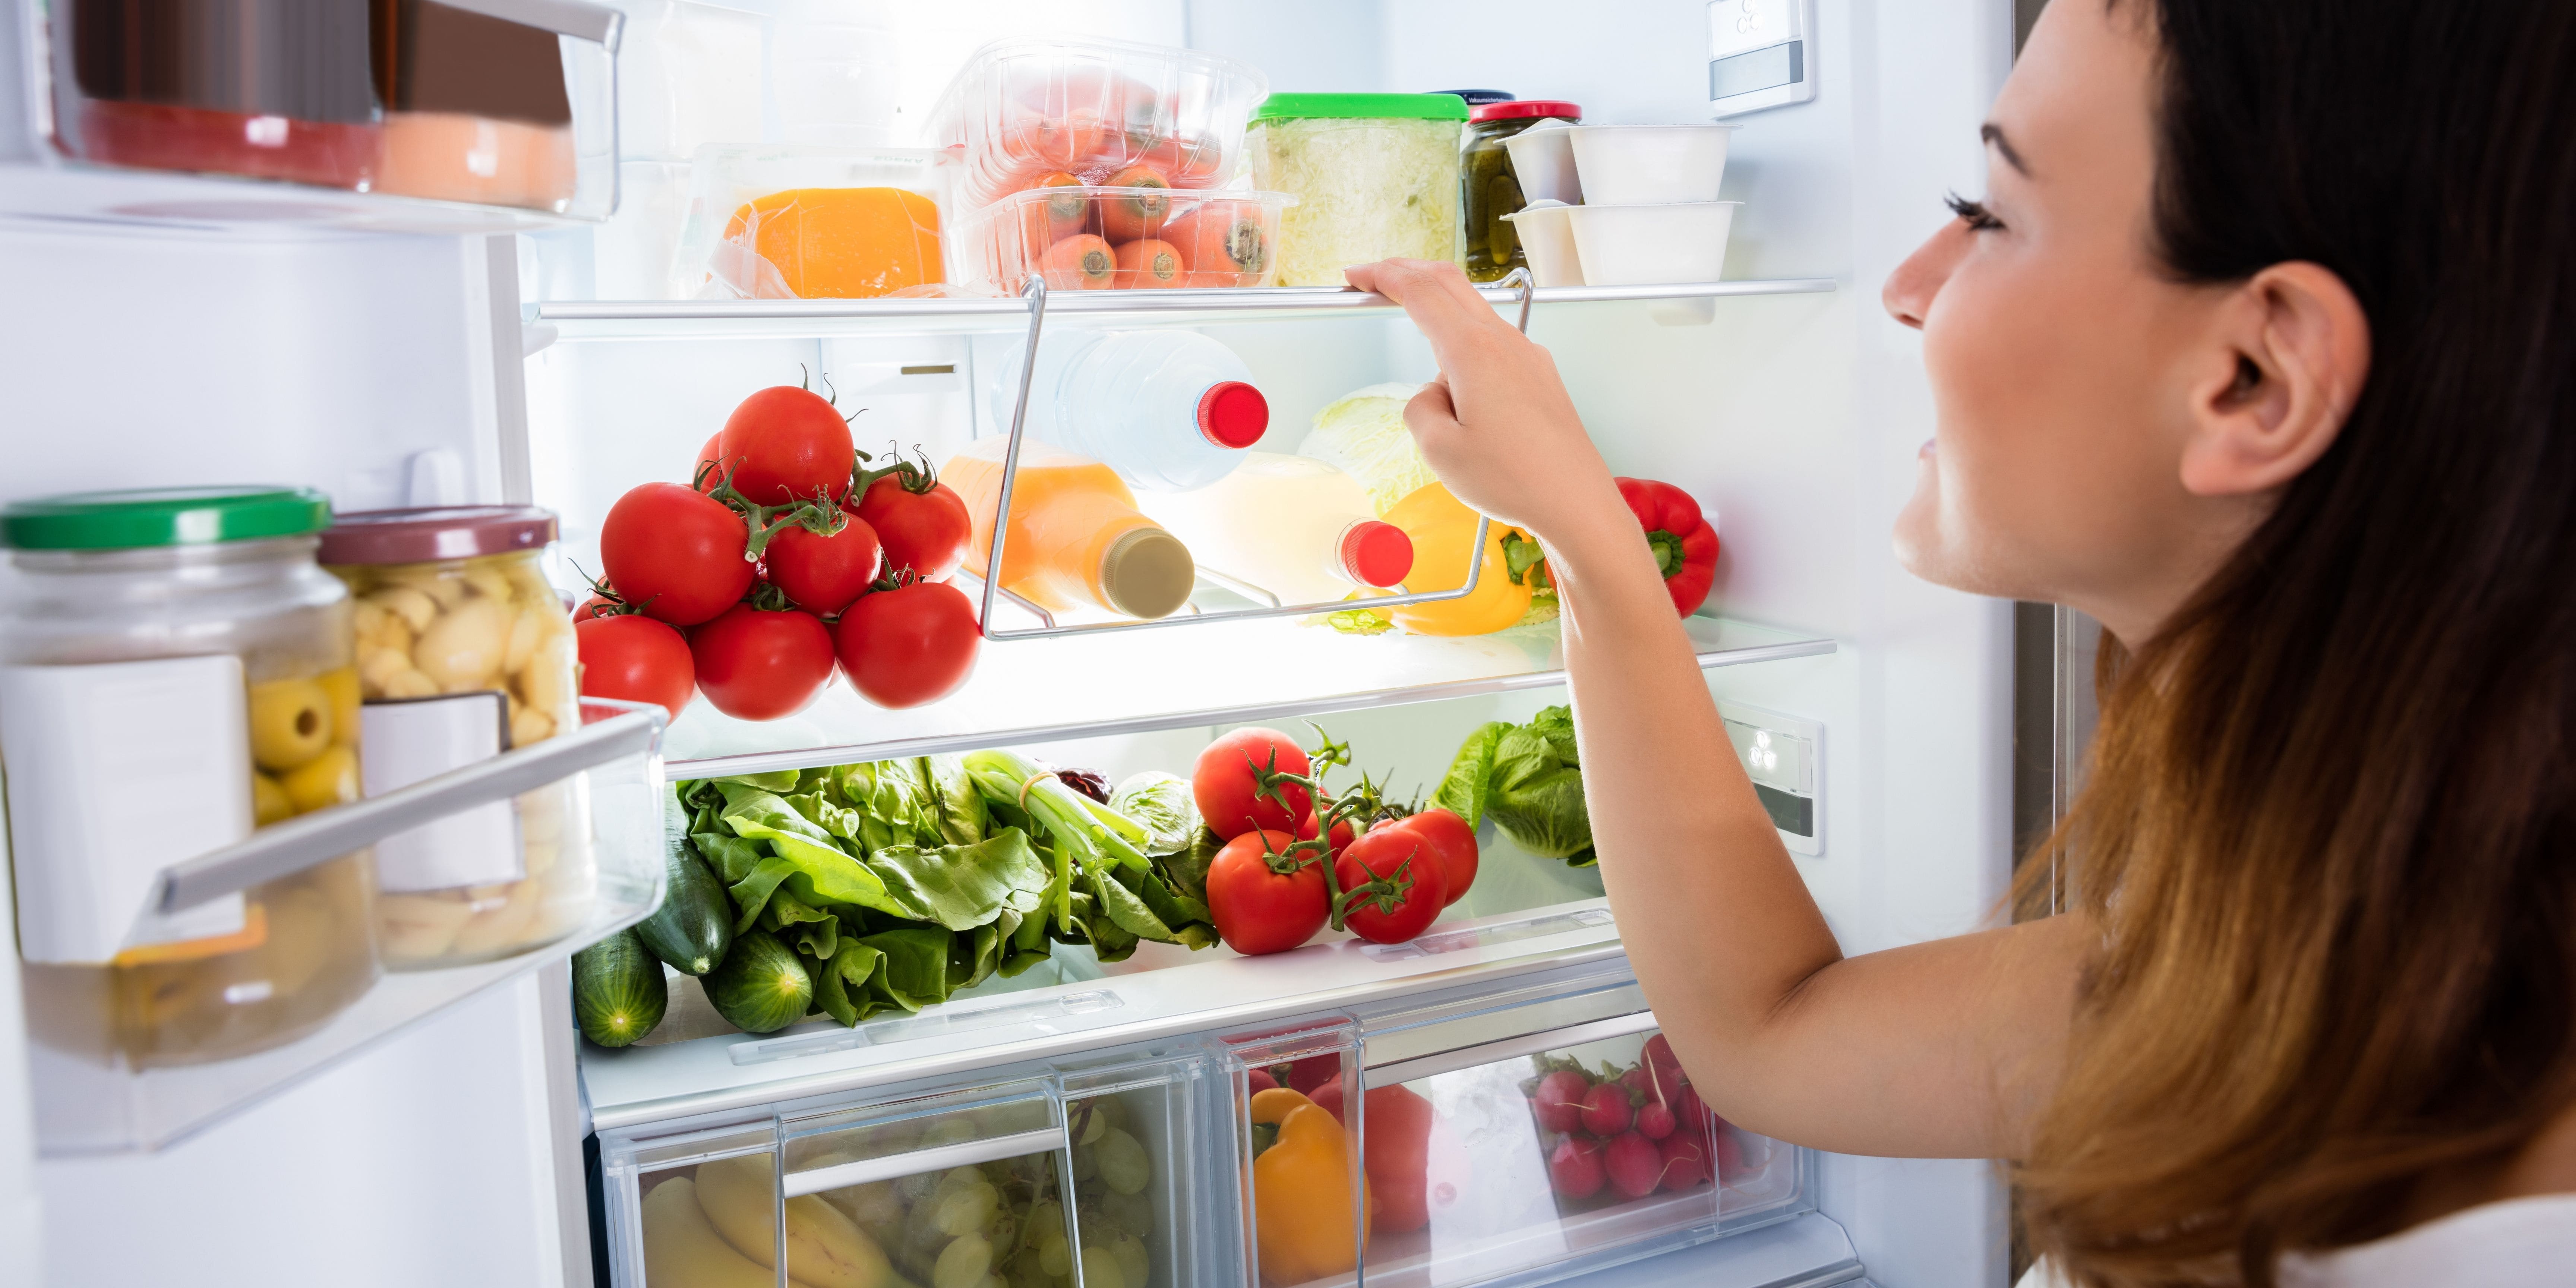 Woman looking into fridge at fresh produce being stored